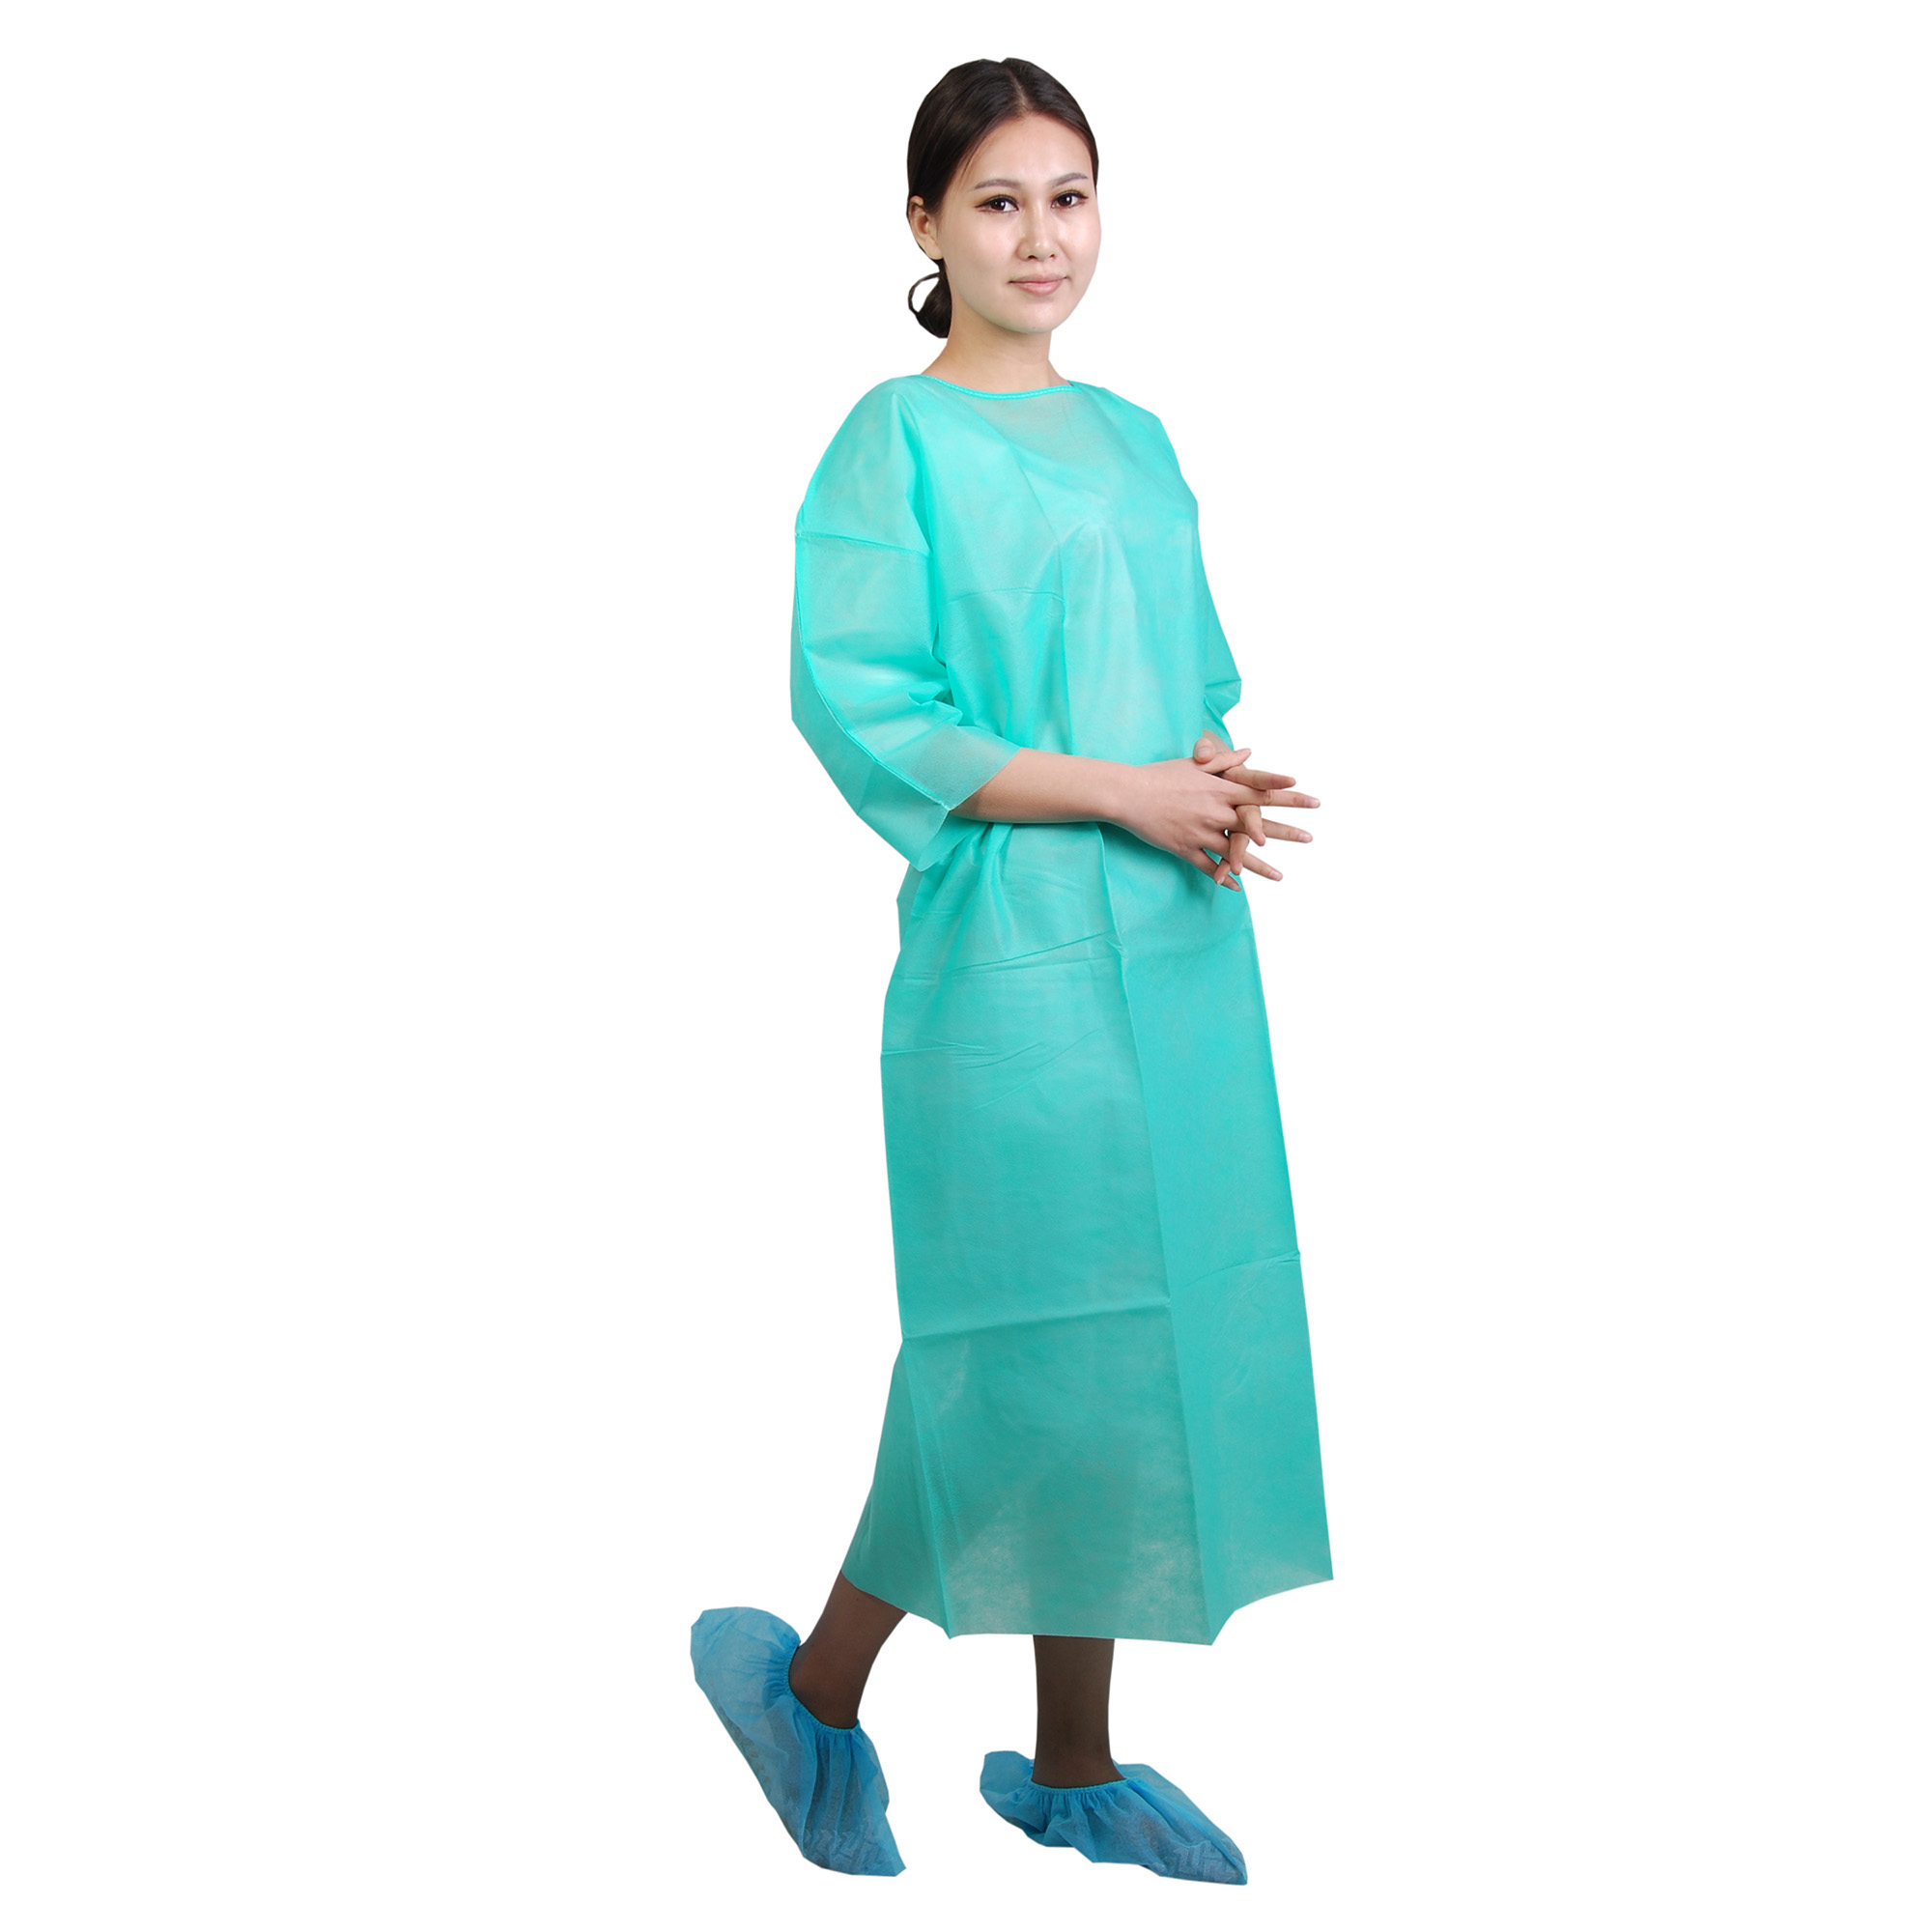 EN13475-2 test report SMMS isolation gown with knitted cuff 